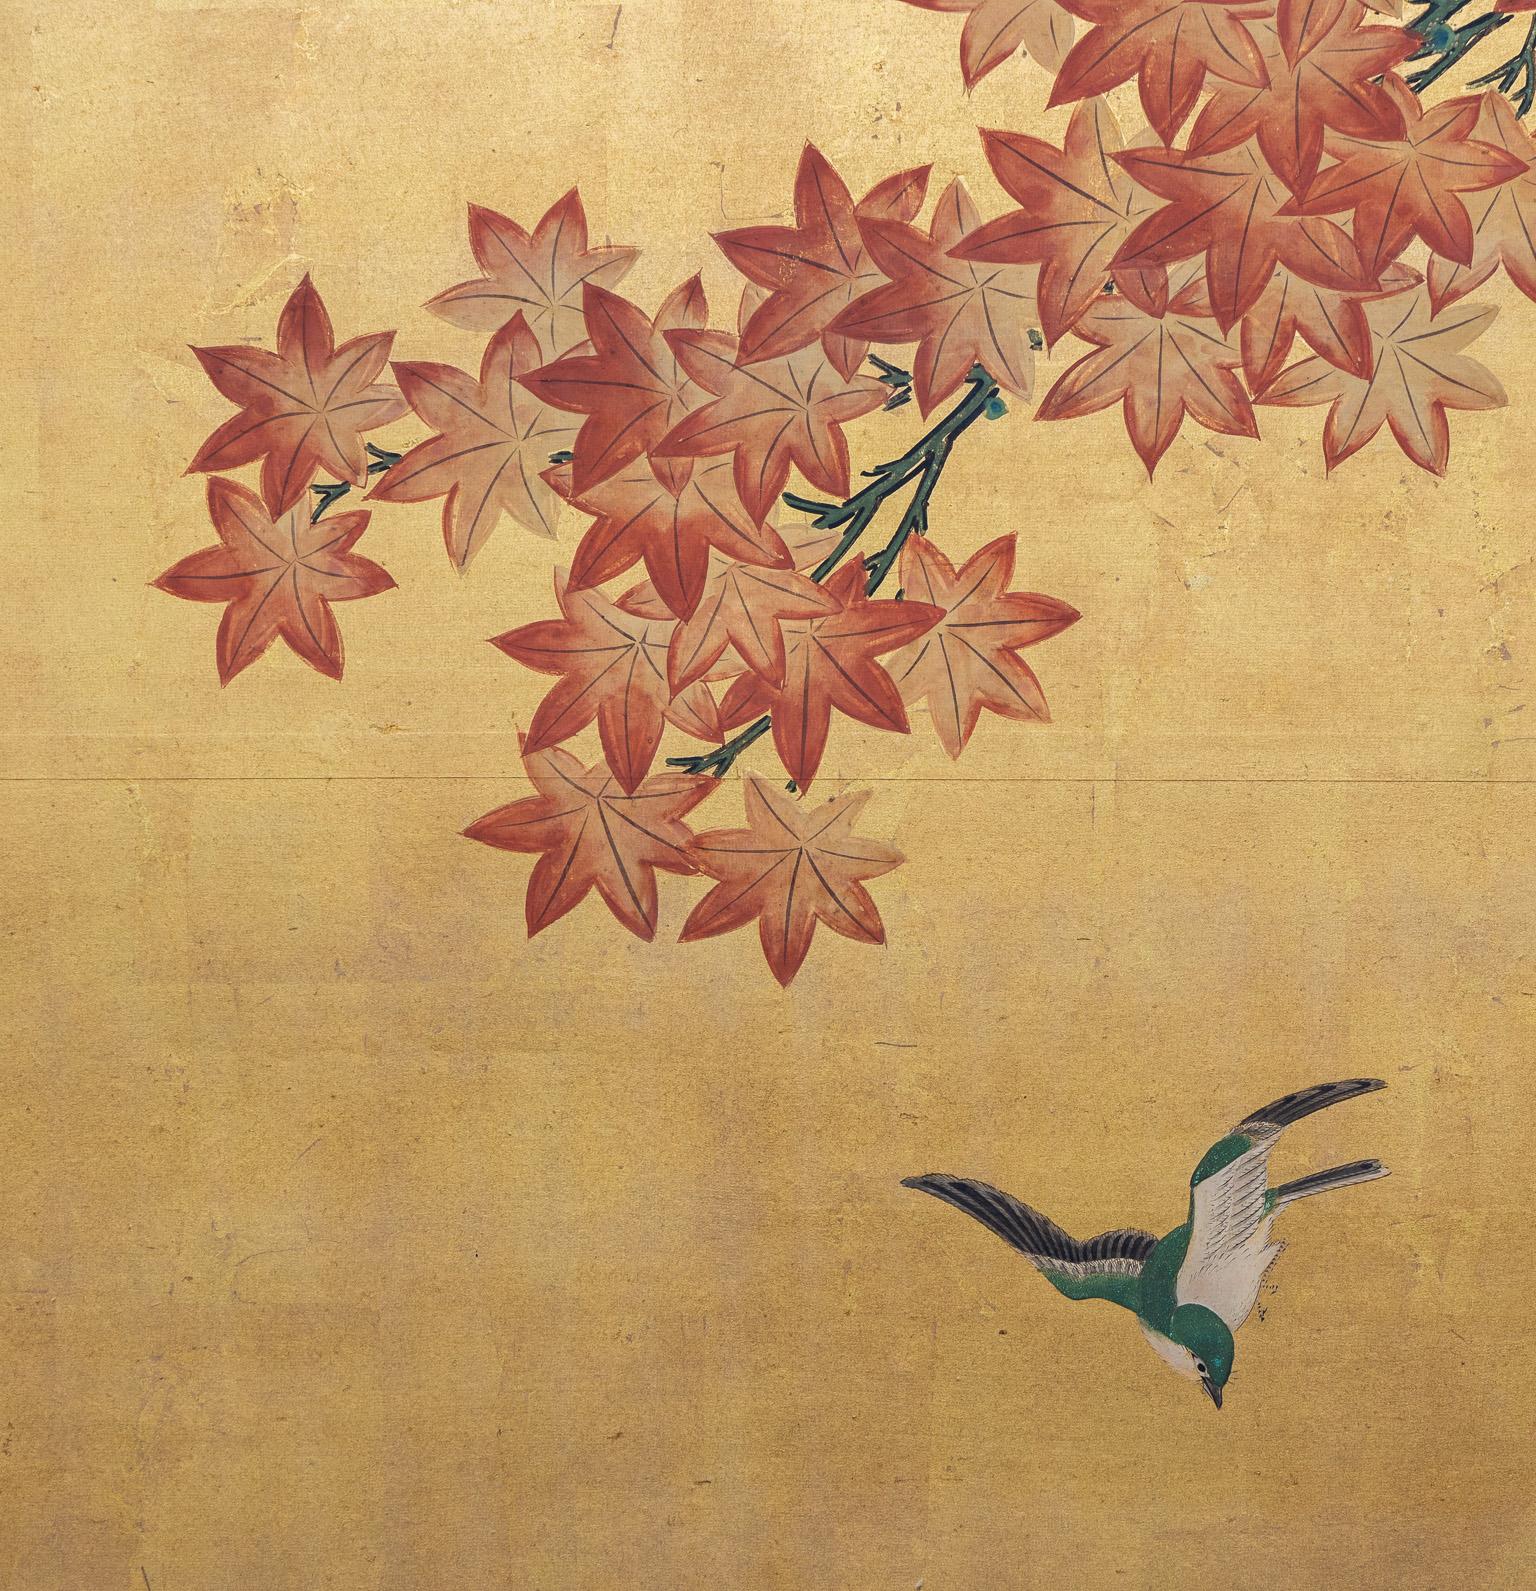 Japanese Two-Panel Folding Screen with Autumn Landscape, circa 1860-70